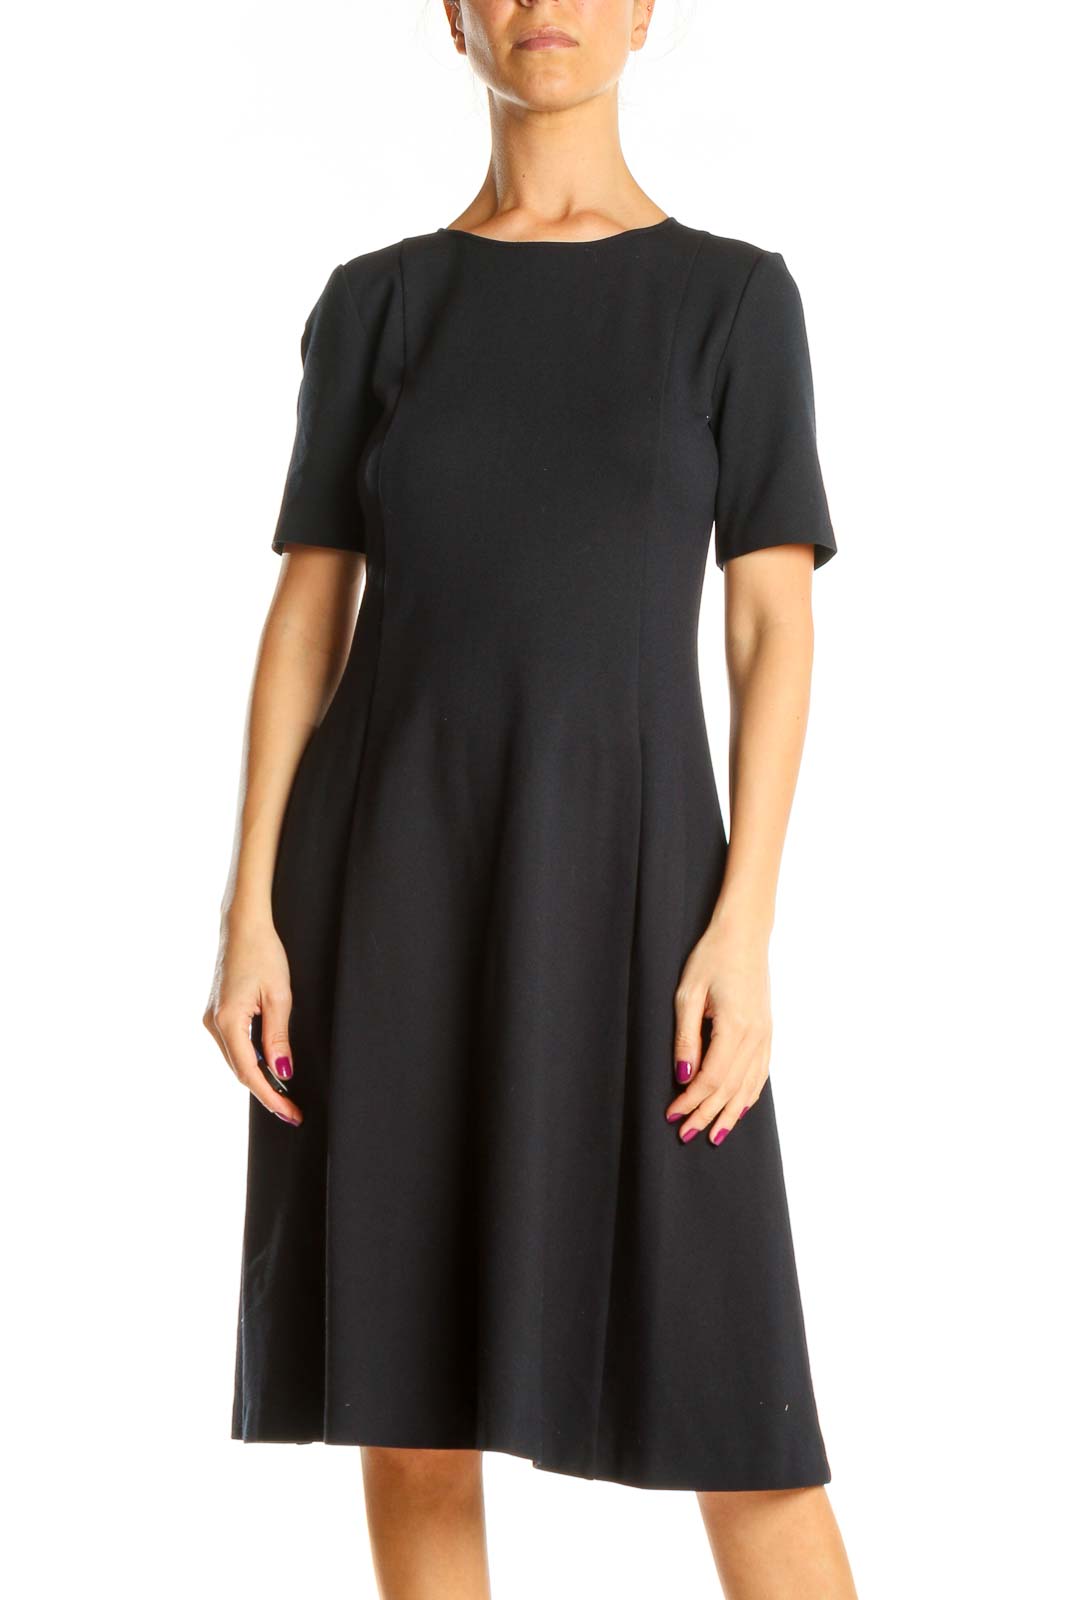 Black Classic Fit & Flare Dress Front